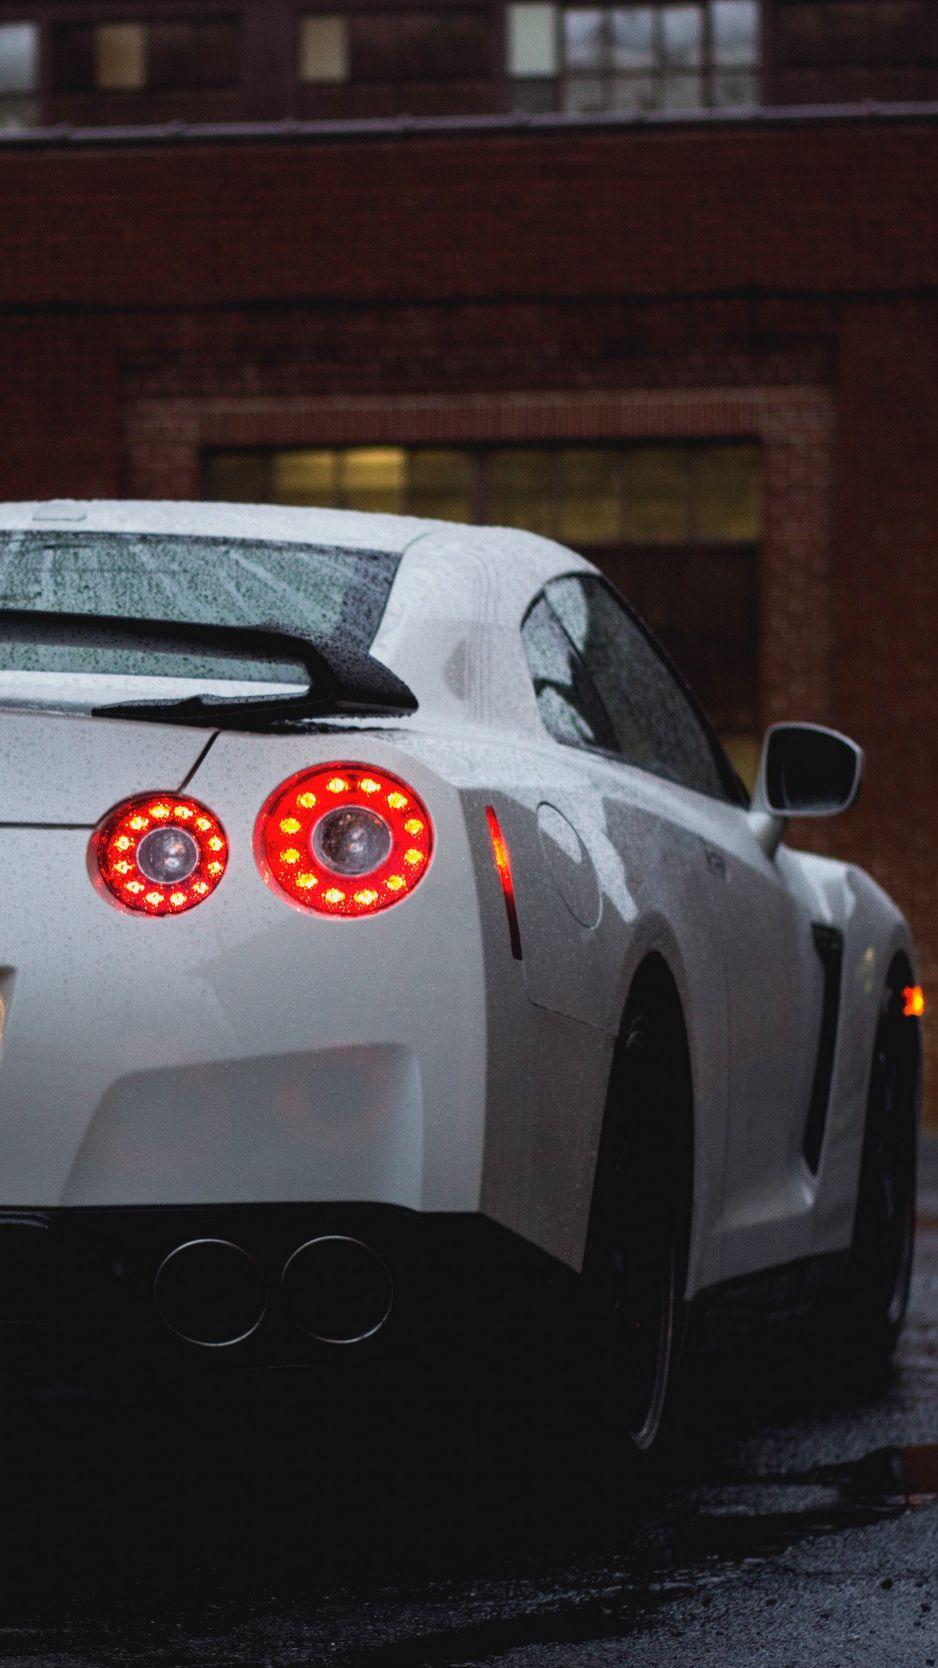 Gtr Iphone Wallpapers Top Free Gtr Iphone Backgrounds Wallpaperaccess